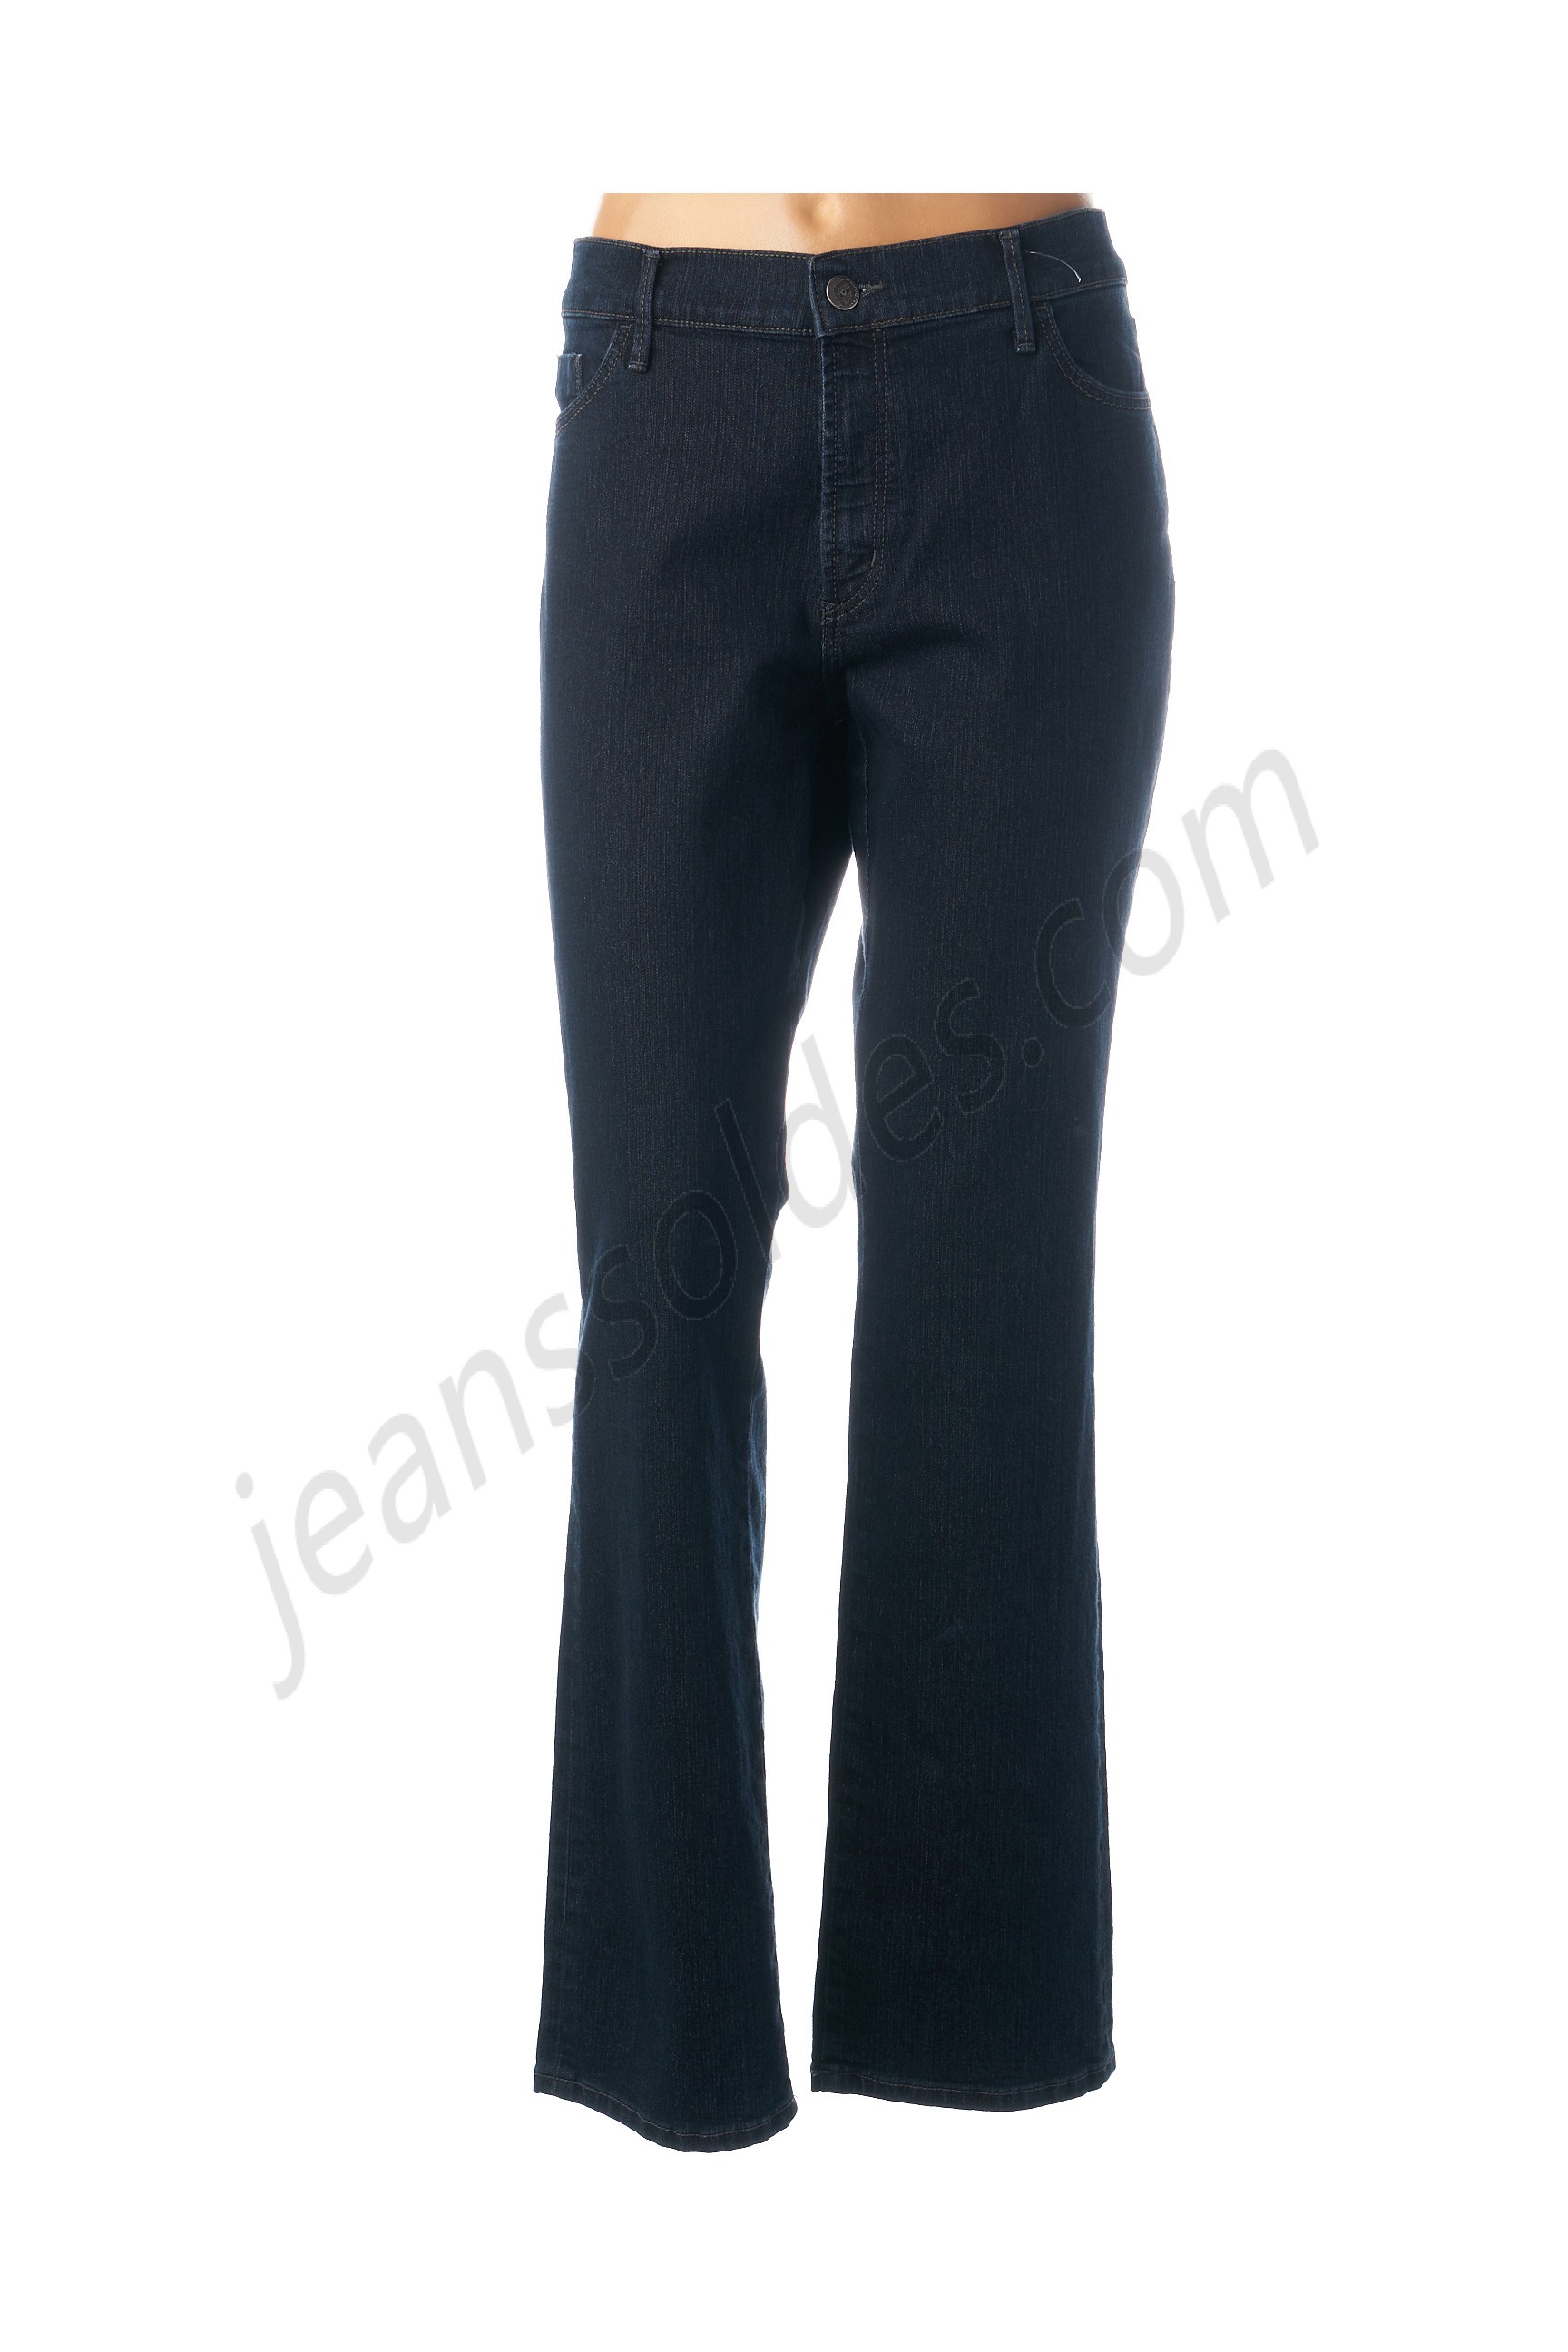 pioneer-Jeans coupe droite prix d’amis - pioneer-Jeans coupe droite prix d’amis